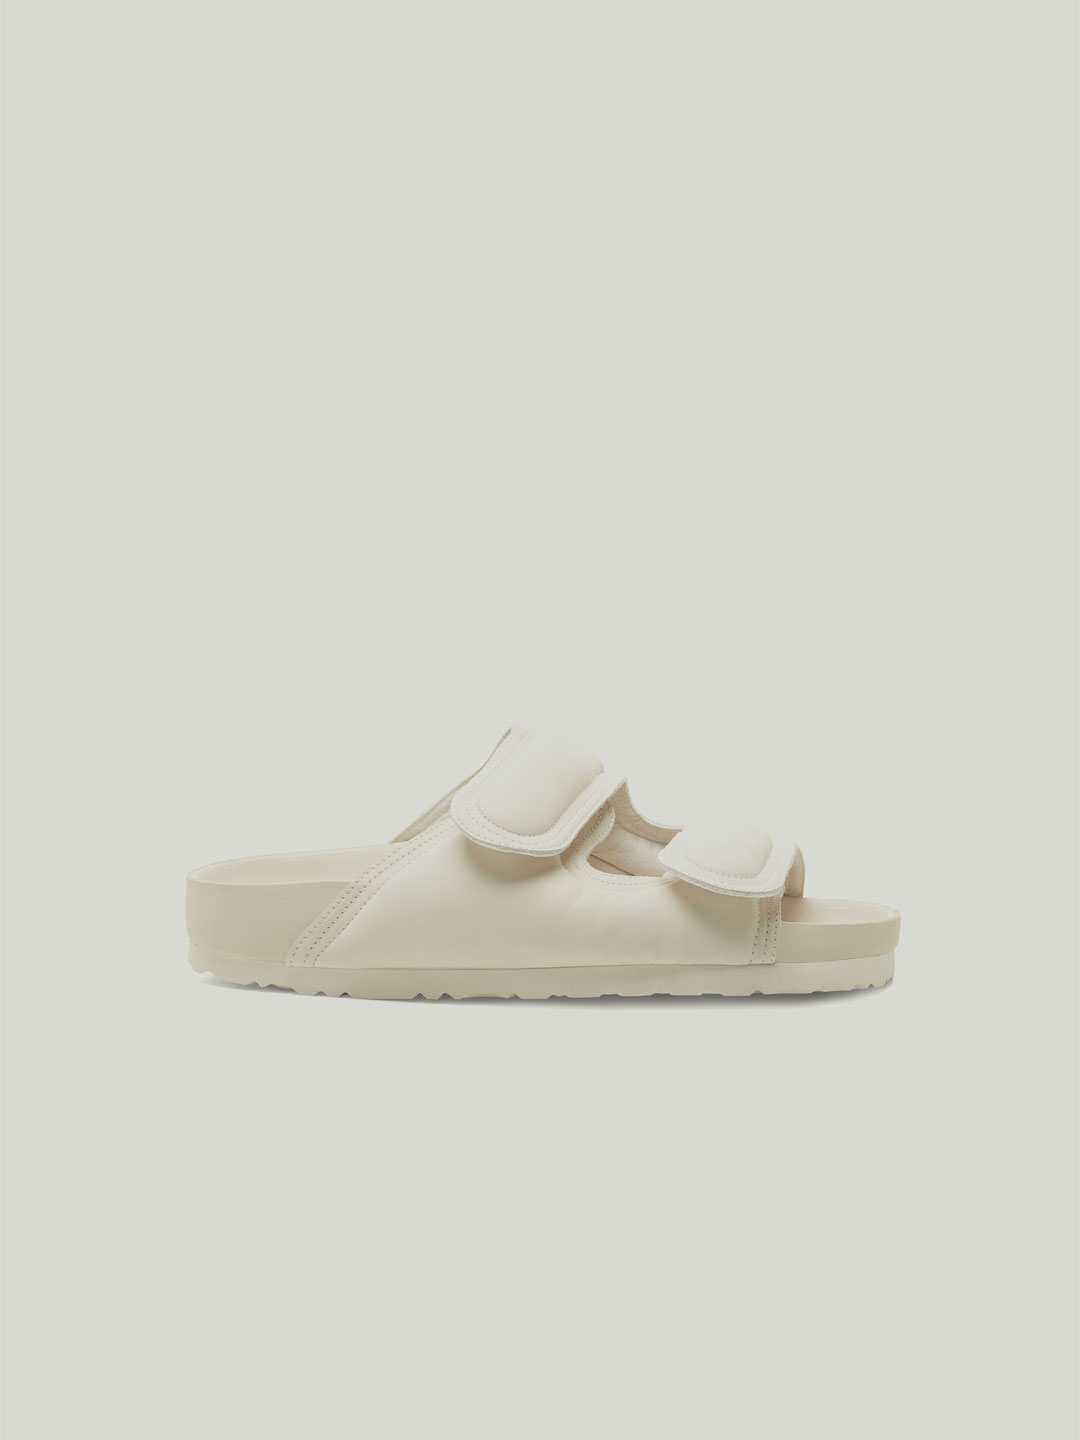 The Beach Comber Leather Sandals - Cream